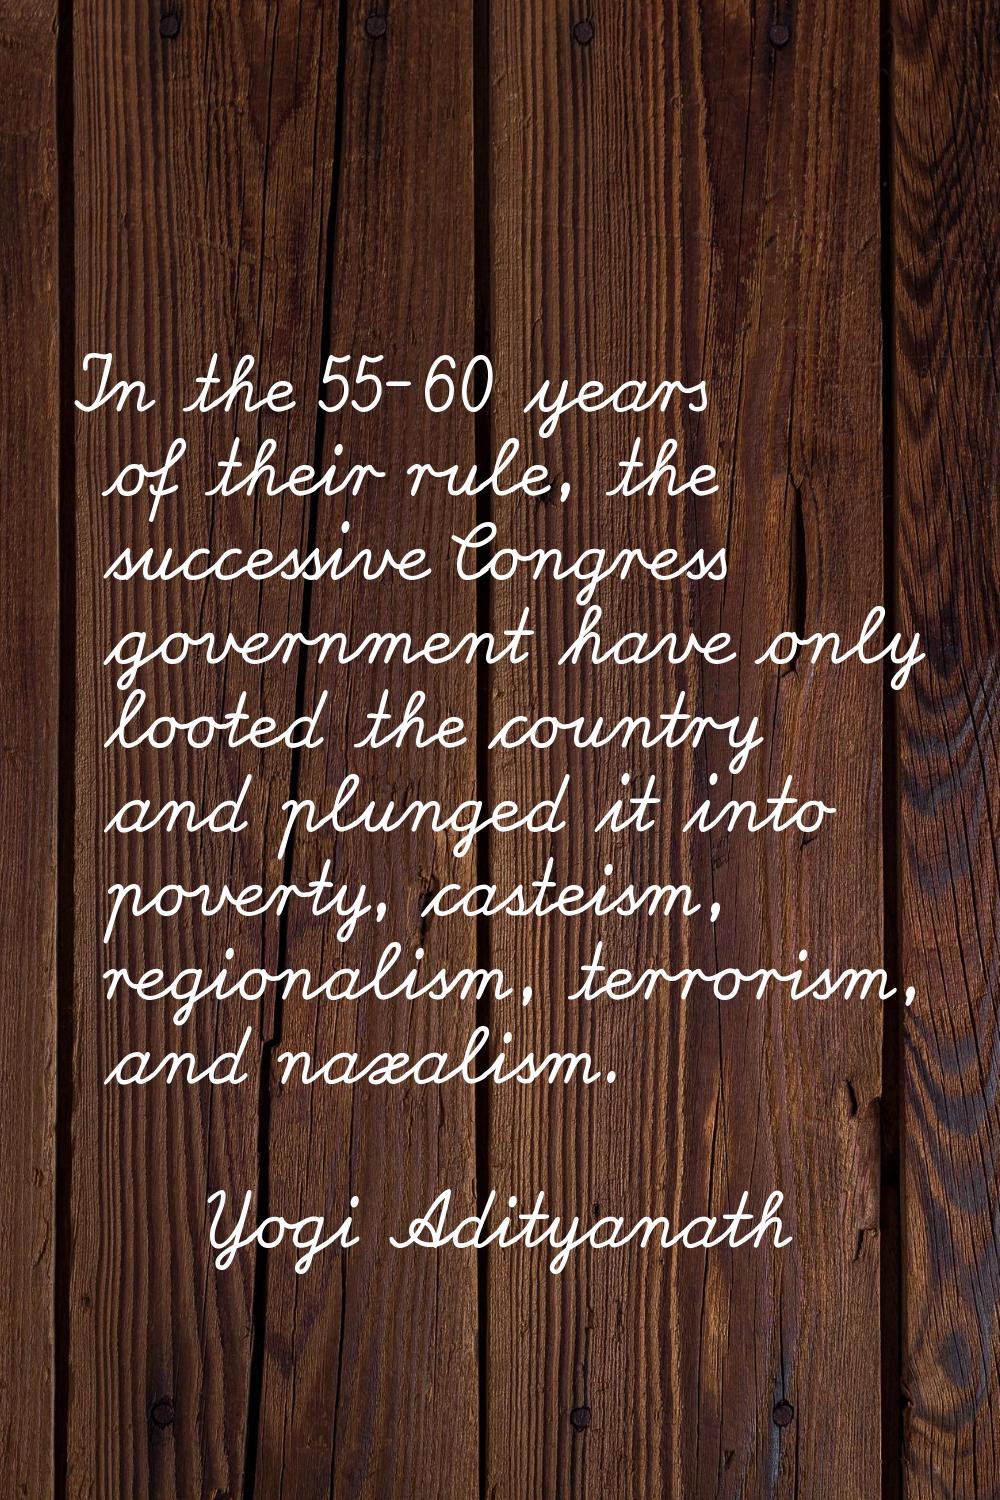 In the 55-60 years of their rule, the successive Congress government have only looted the country a